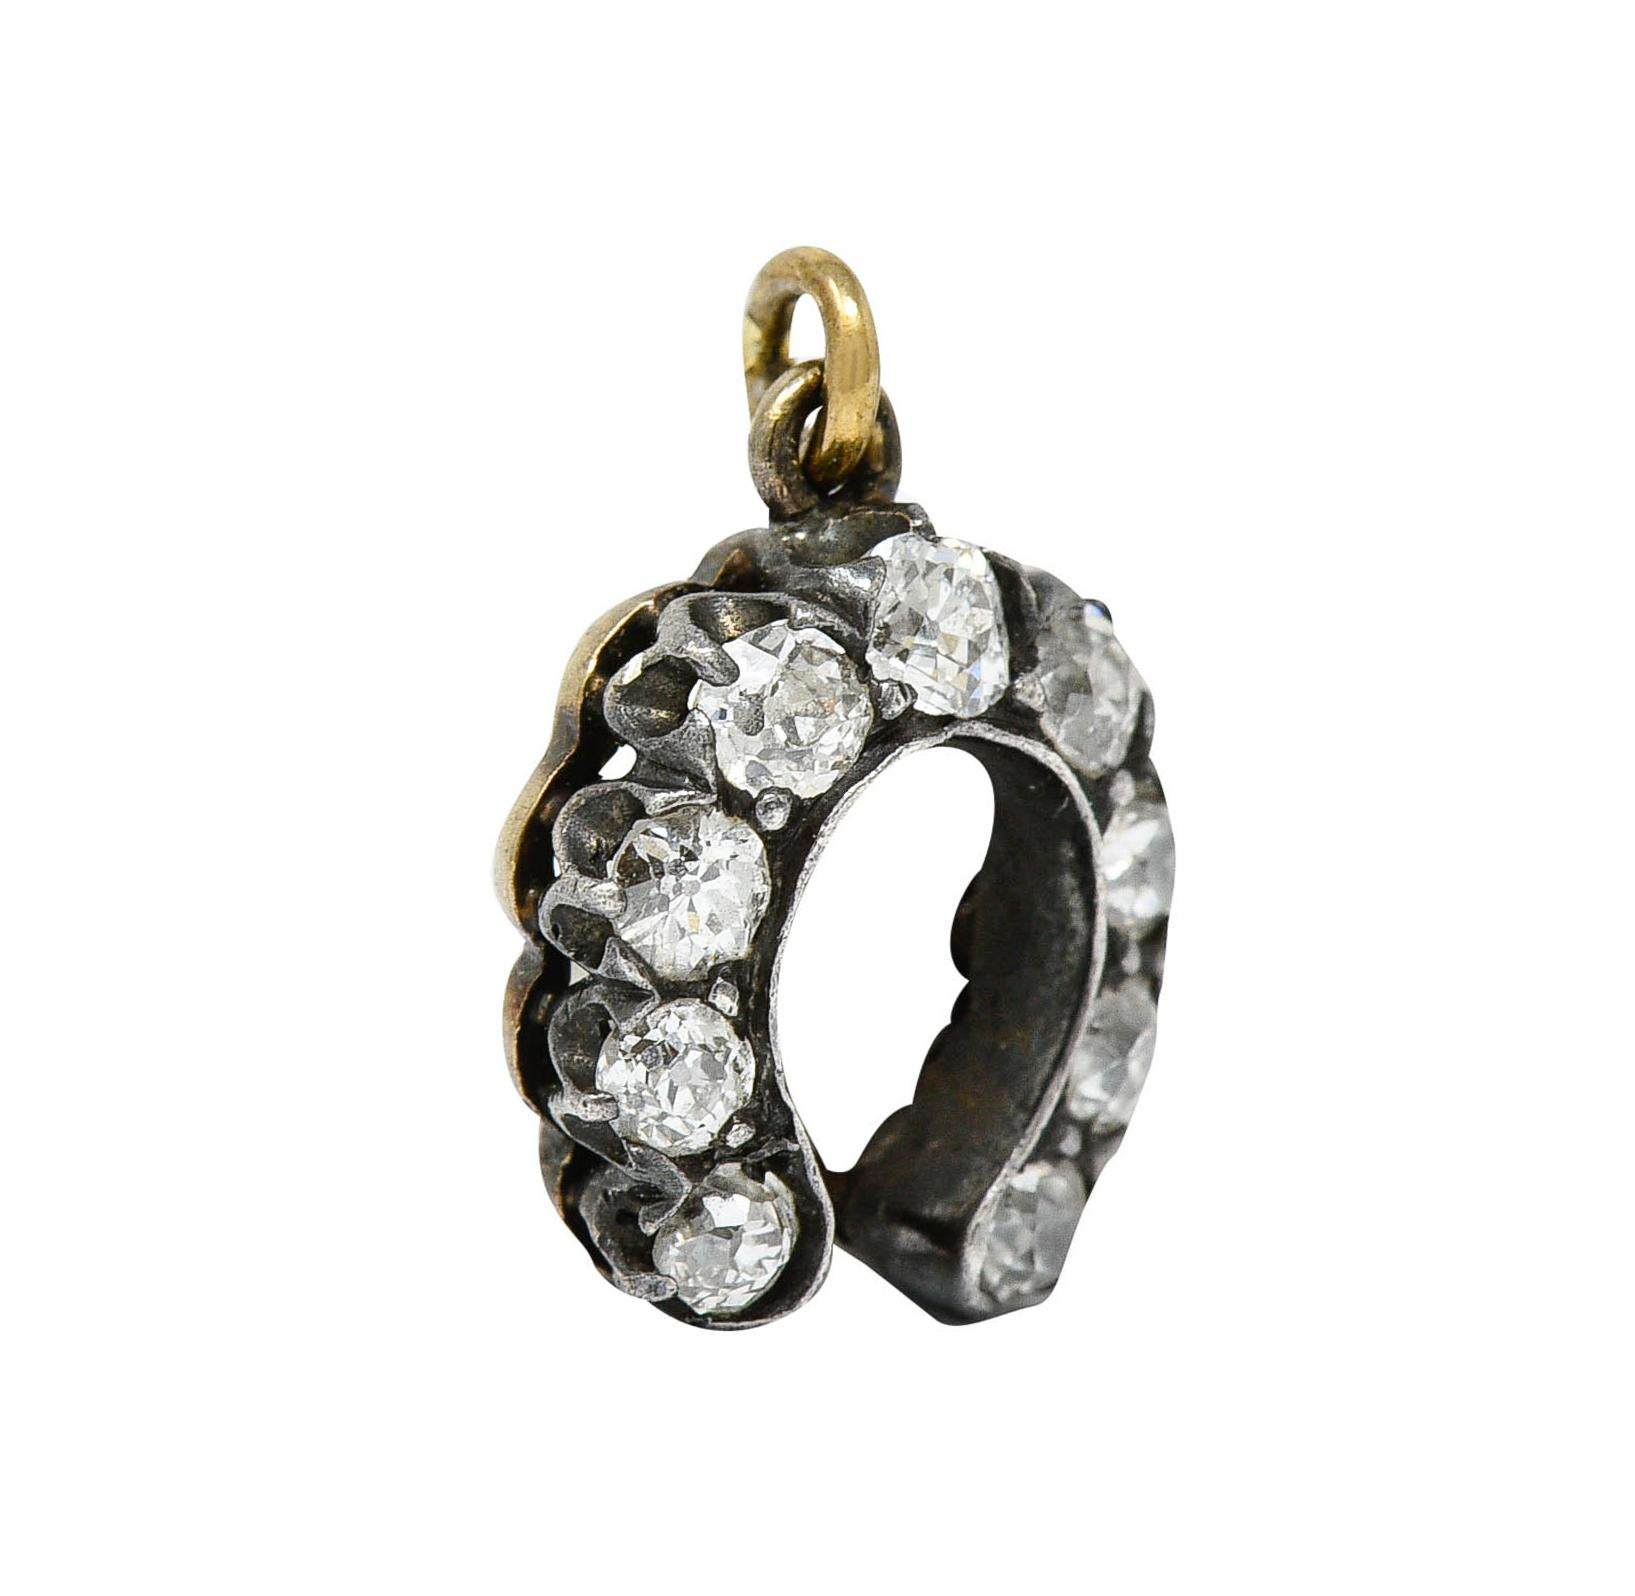 Charm is designed as a silver-topped horseshoe

Comprised of prong set old mine cut diamonds

Weighing in total approximately 0.50 carat - quality consistent with age

Tested as silver-topped 18 karat gold

Circa: 1900

Measures: 3/8 x 1/2